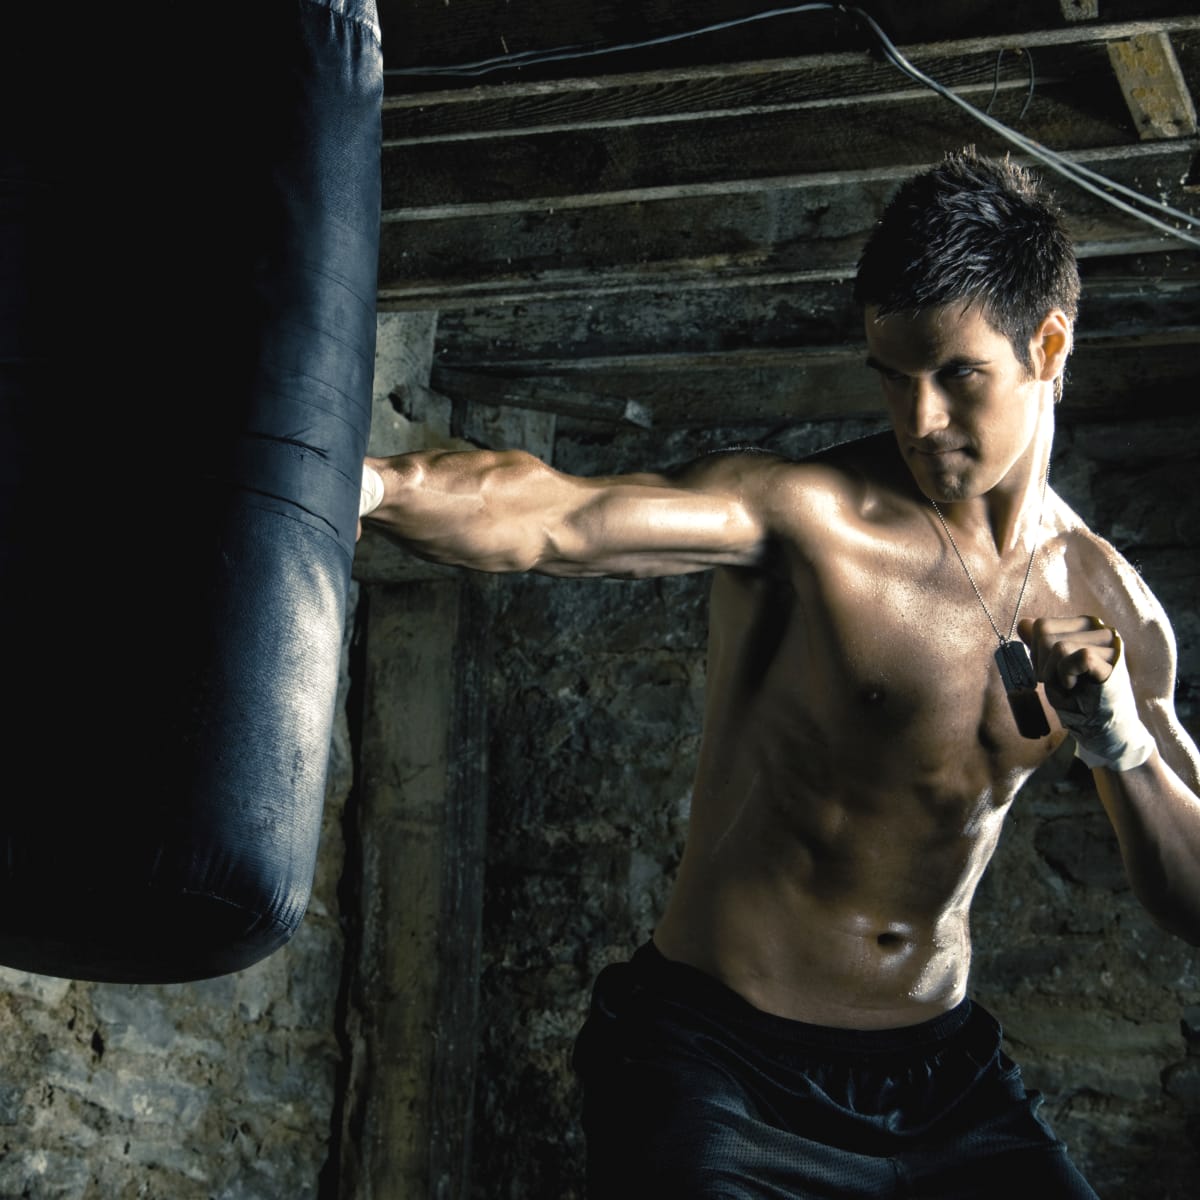 6 Shadow Boxing Combos For Fat Loss